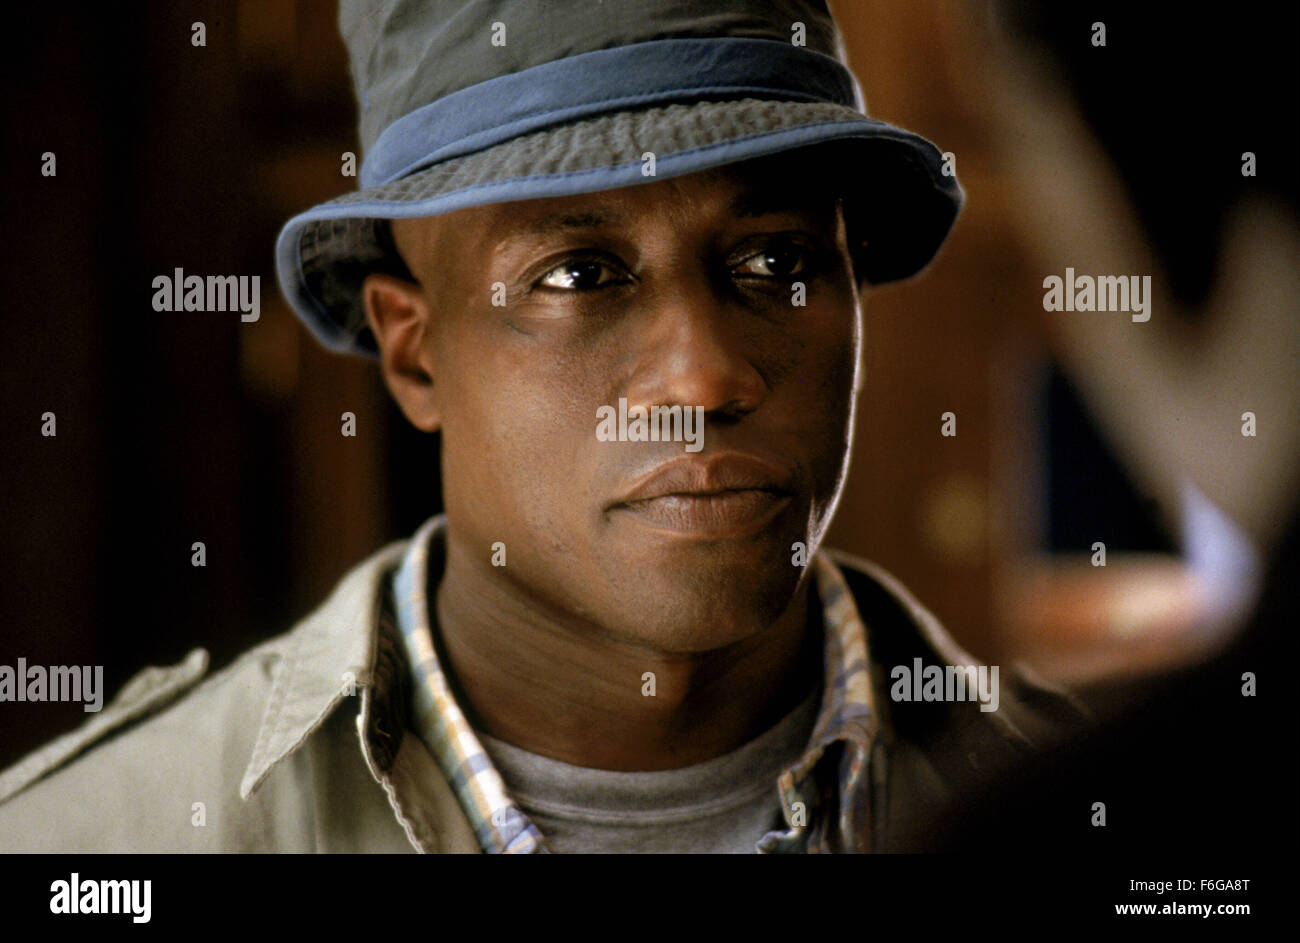 RELEASE DATE: 6 March 1998. MOVIE TITLE: U.S. Marshals STUDIO: Kopelson Entertainment. PLOT: US Marshal Samuel Gerard and his team of Marshals are assigned to track down Sheridan, a murderer and robber. PICTURED: WESLEY SNIPES as Mark J. Sheridan. Stock Photo